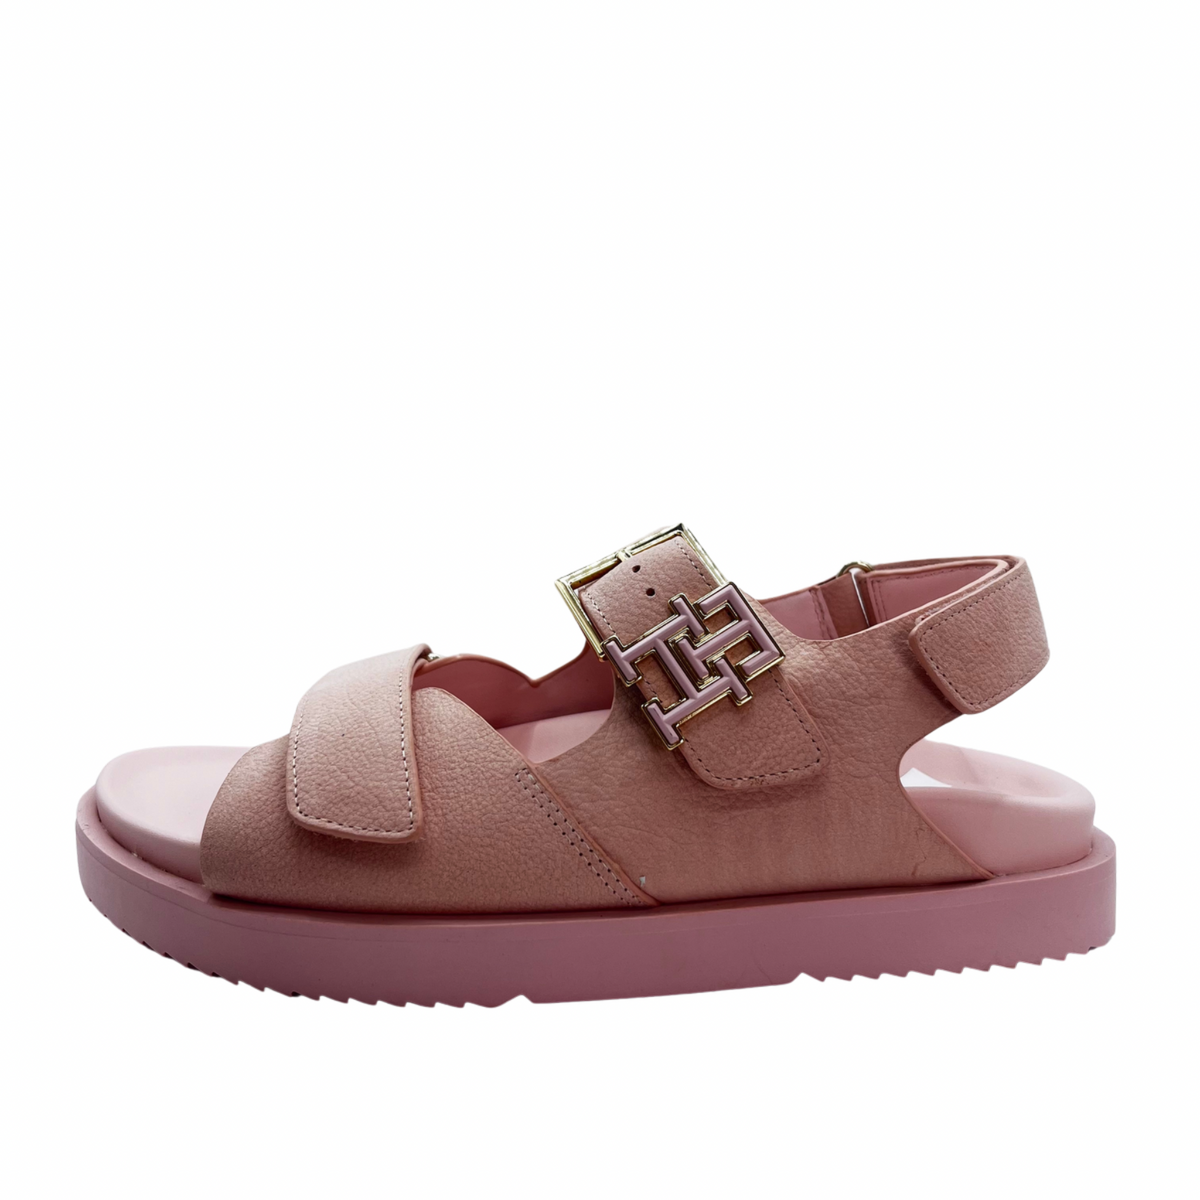 Tommy Hilfiger Pink Sandals with Velcro Strap